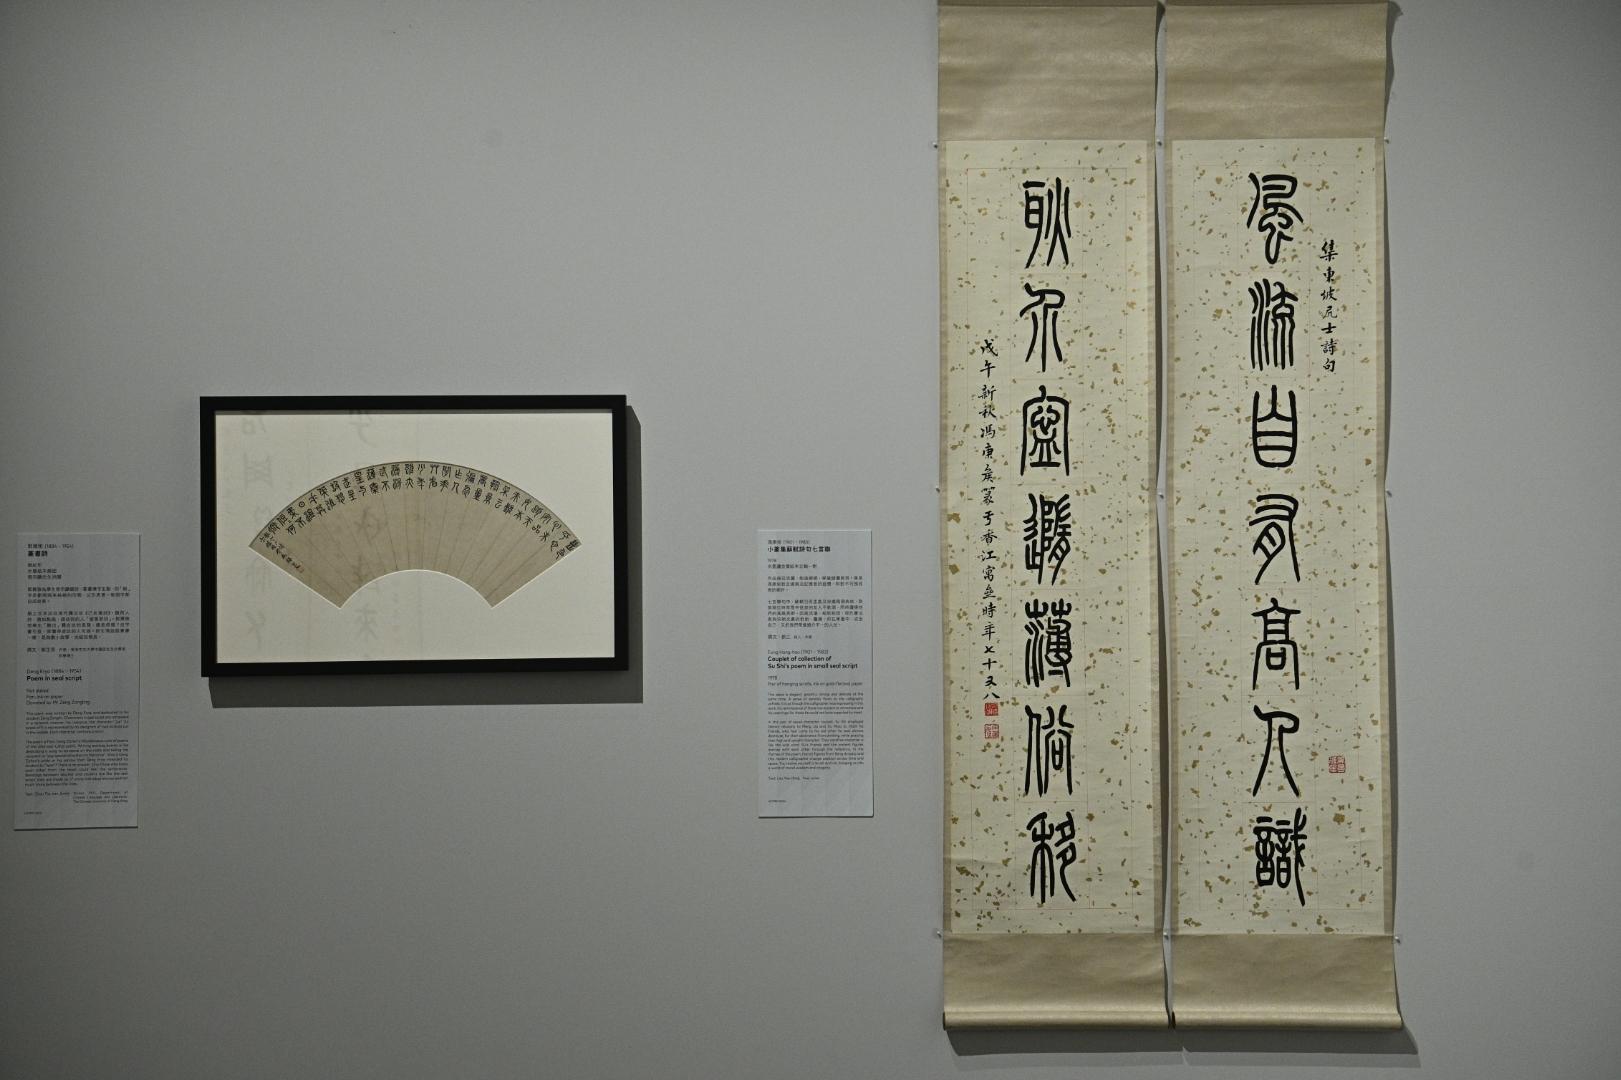 The "City Rhymes: The Melodious Notes of Calligraphy" exhibition will be held from tomorrow (July 22) at the Hong Kong Museum of Art. Photo shows two calligraphy pieces, Deng Erya's "Poem in seal script" (left), and Fung Hong-hou's "Couplet of collection of Su Shi's poem in small seal script" (right).